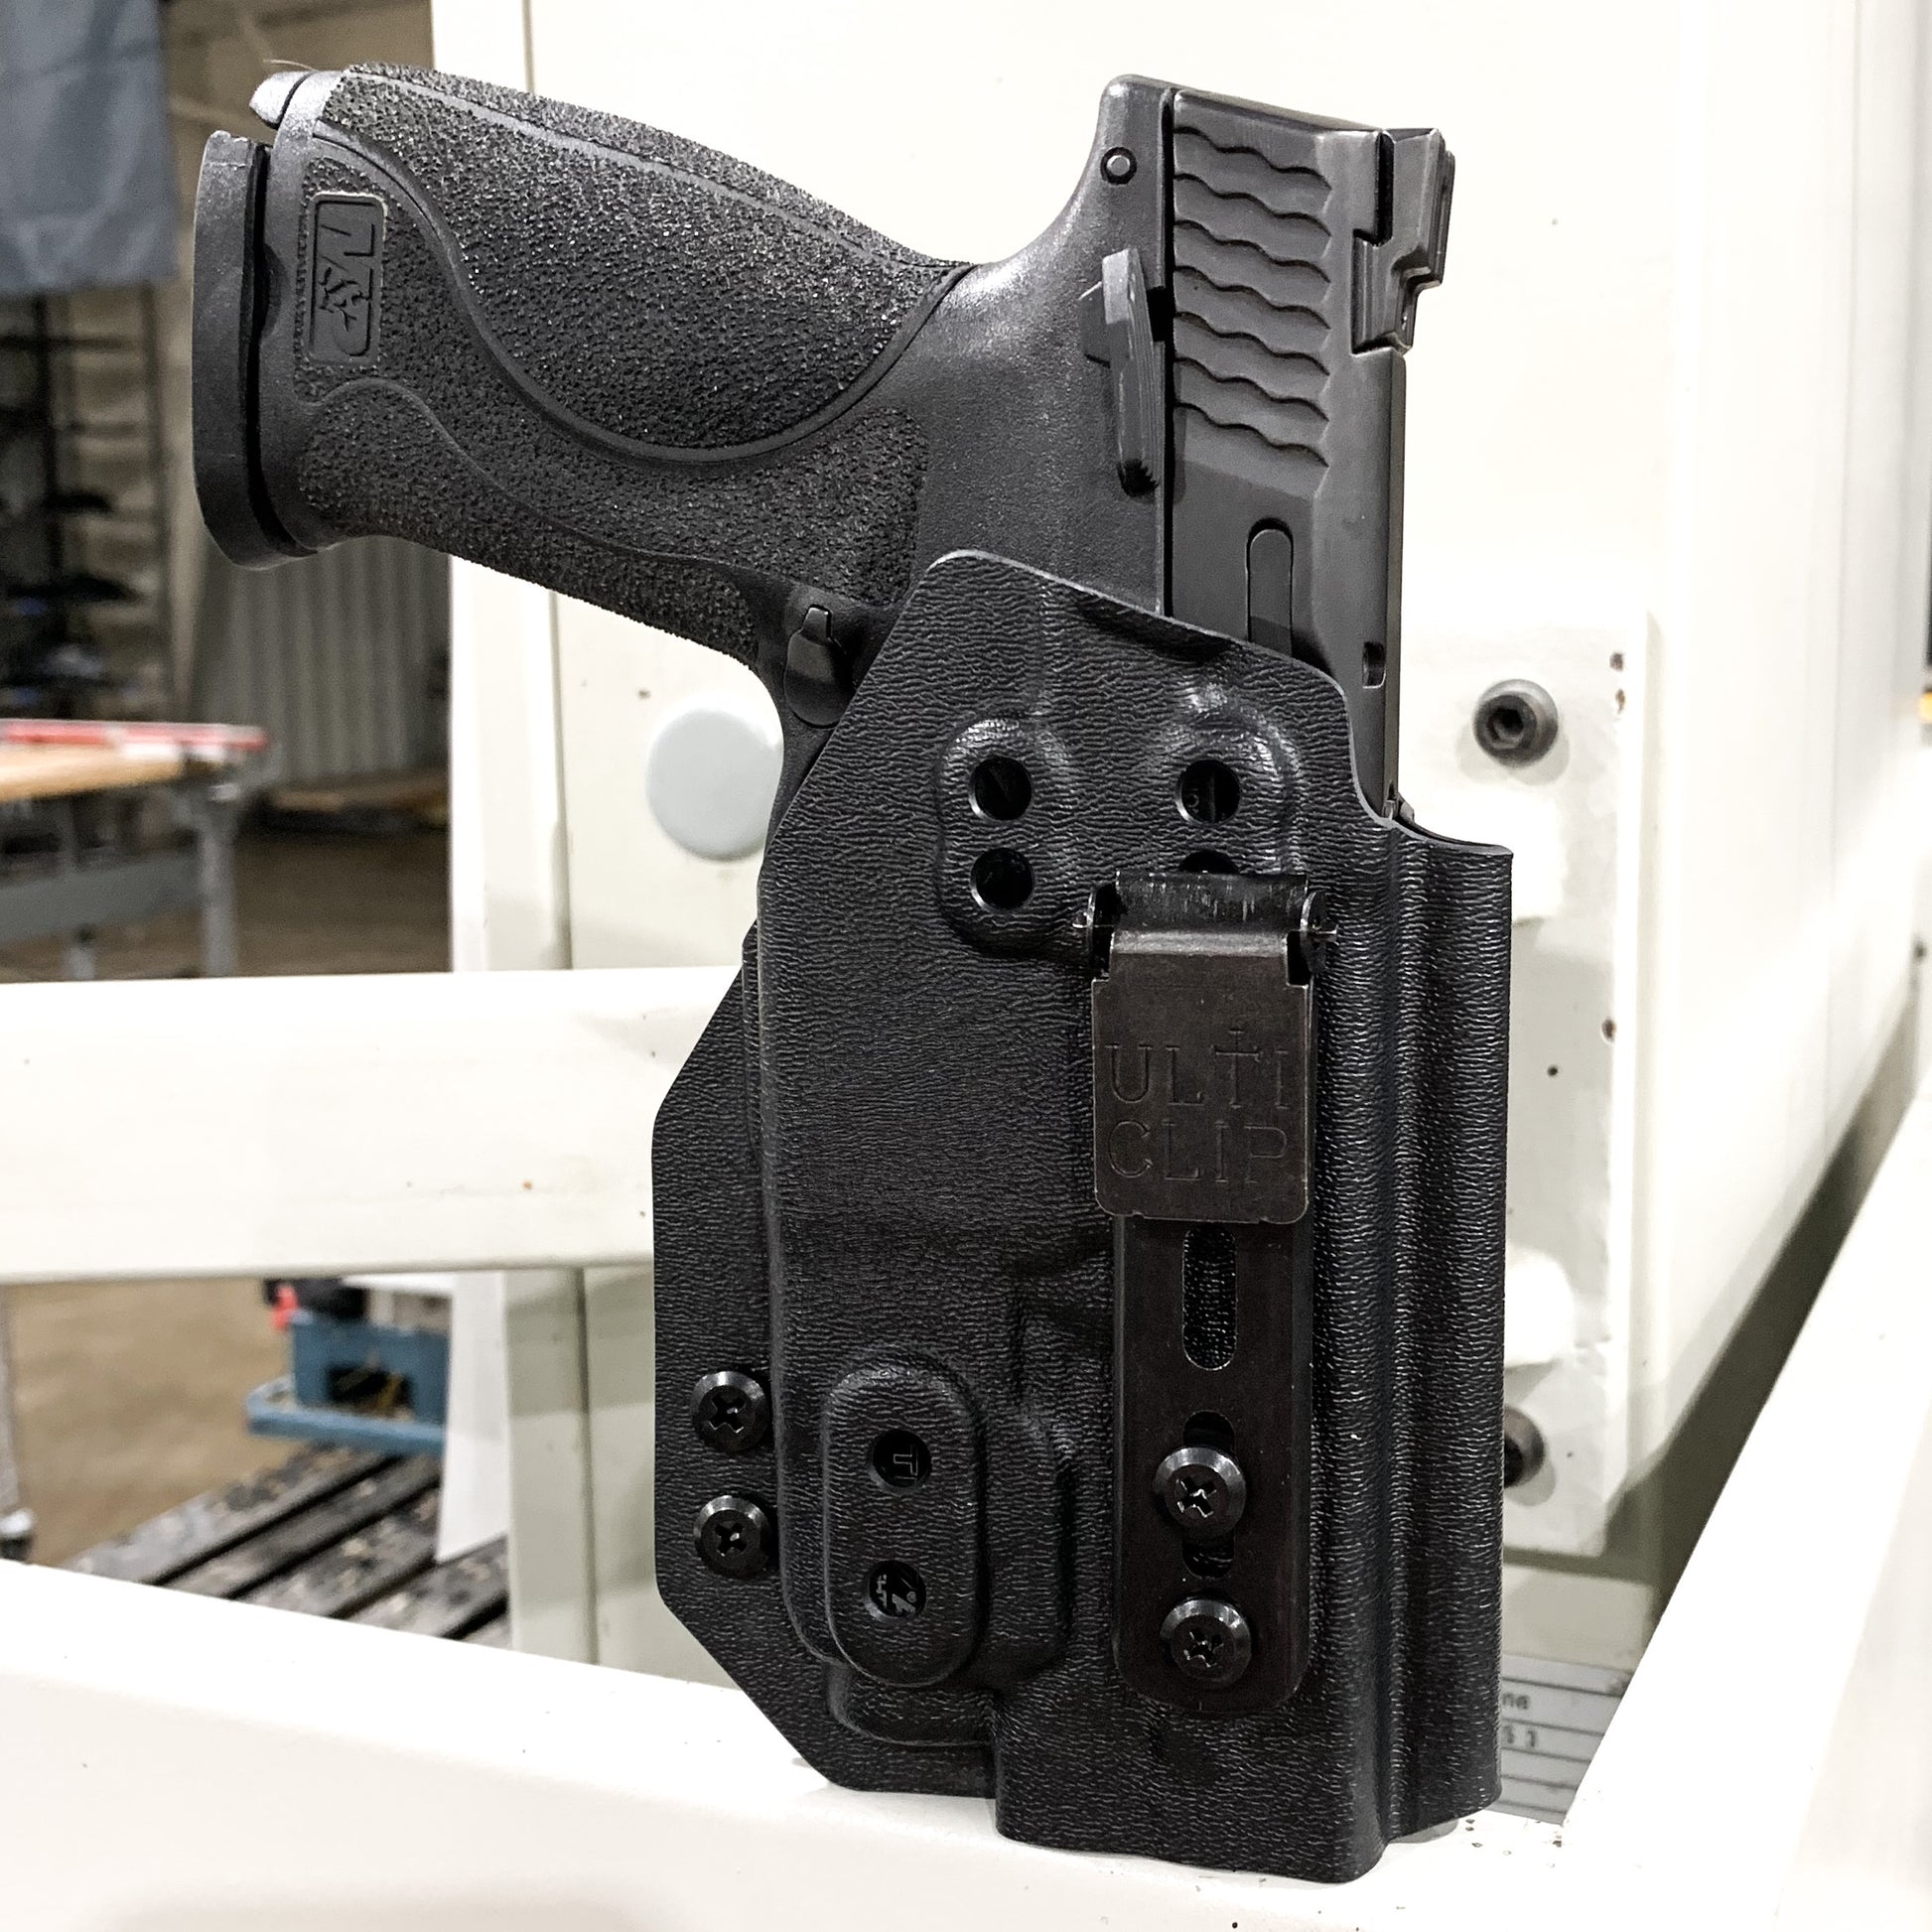 For the Best Inside Waistband IWB AIWB Kydex Holster designed to fit the Smith & Wesson M&P Compact 9mm 4" pistols with the Streamlight TLR-7X, TLR-7 X, & TLR-7 A, shop Four Brothers 4BROS holsters. Full sweat guard, adjustable retention, smooth edges. Cleared for red dot sights. Proudly made in the USA.